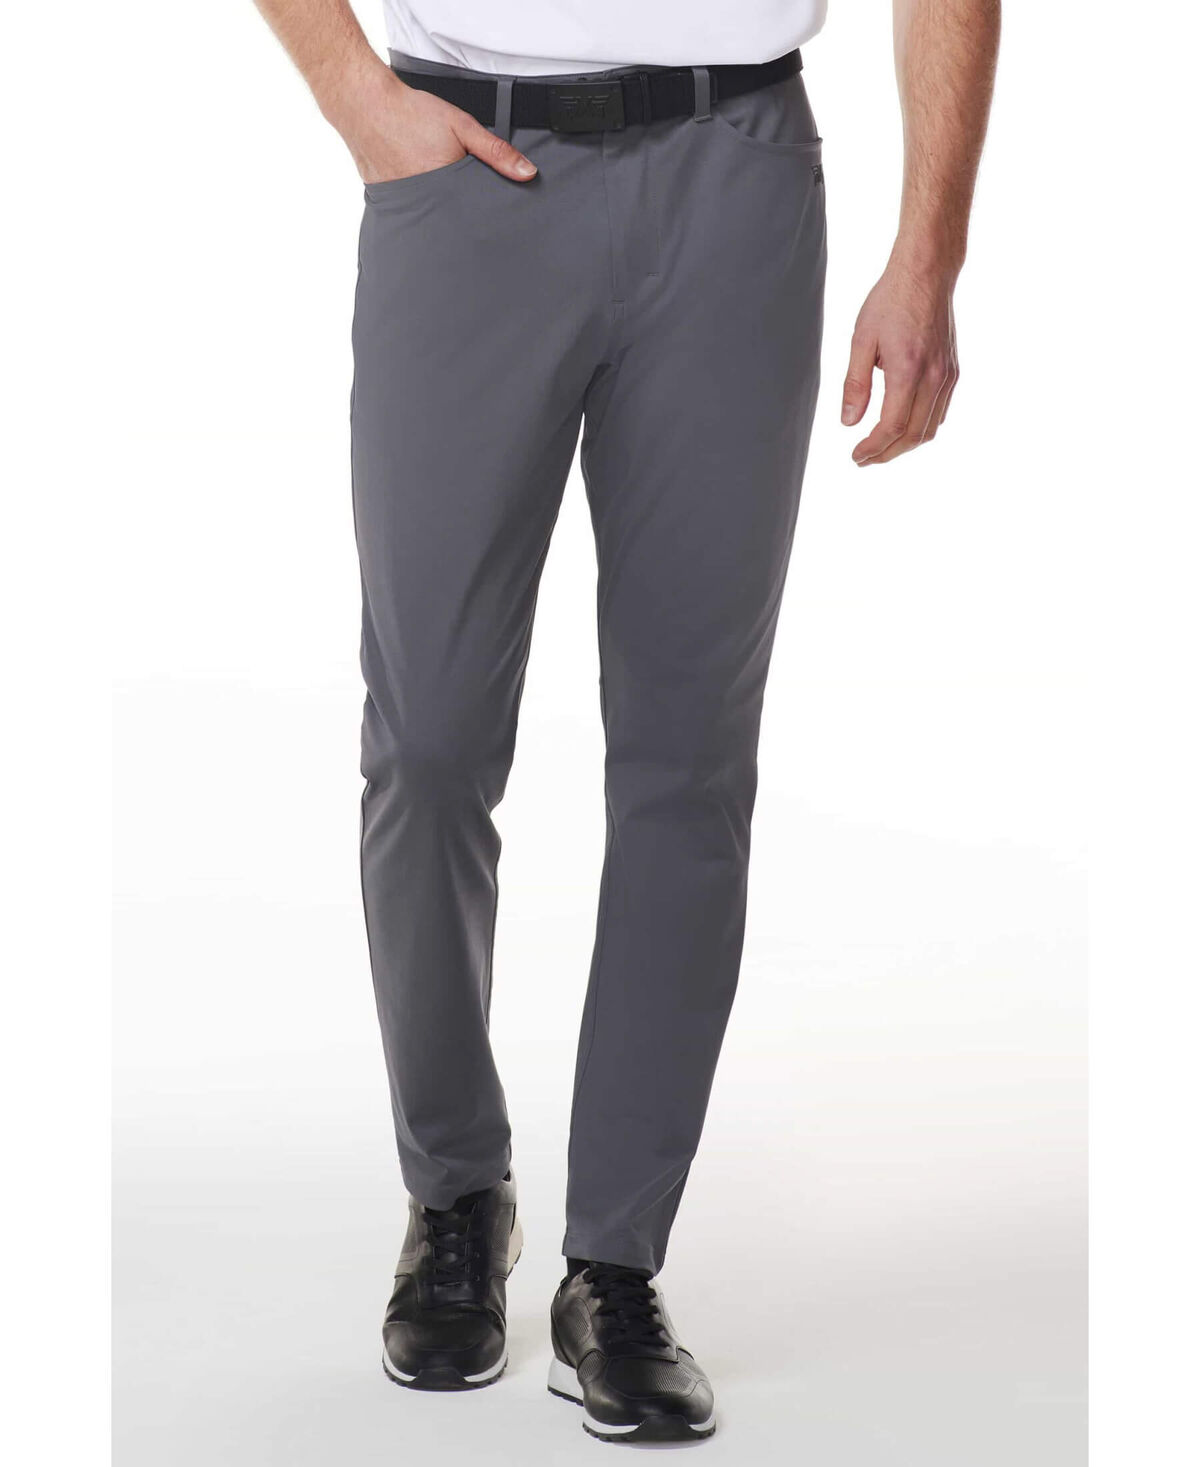 Slim Trouser Pants  Shop the Highest Quality Golf Apparel, Gear,  Accessories and Golf Clubs at PXG